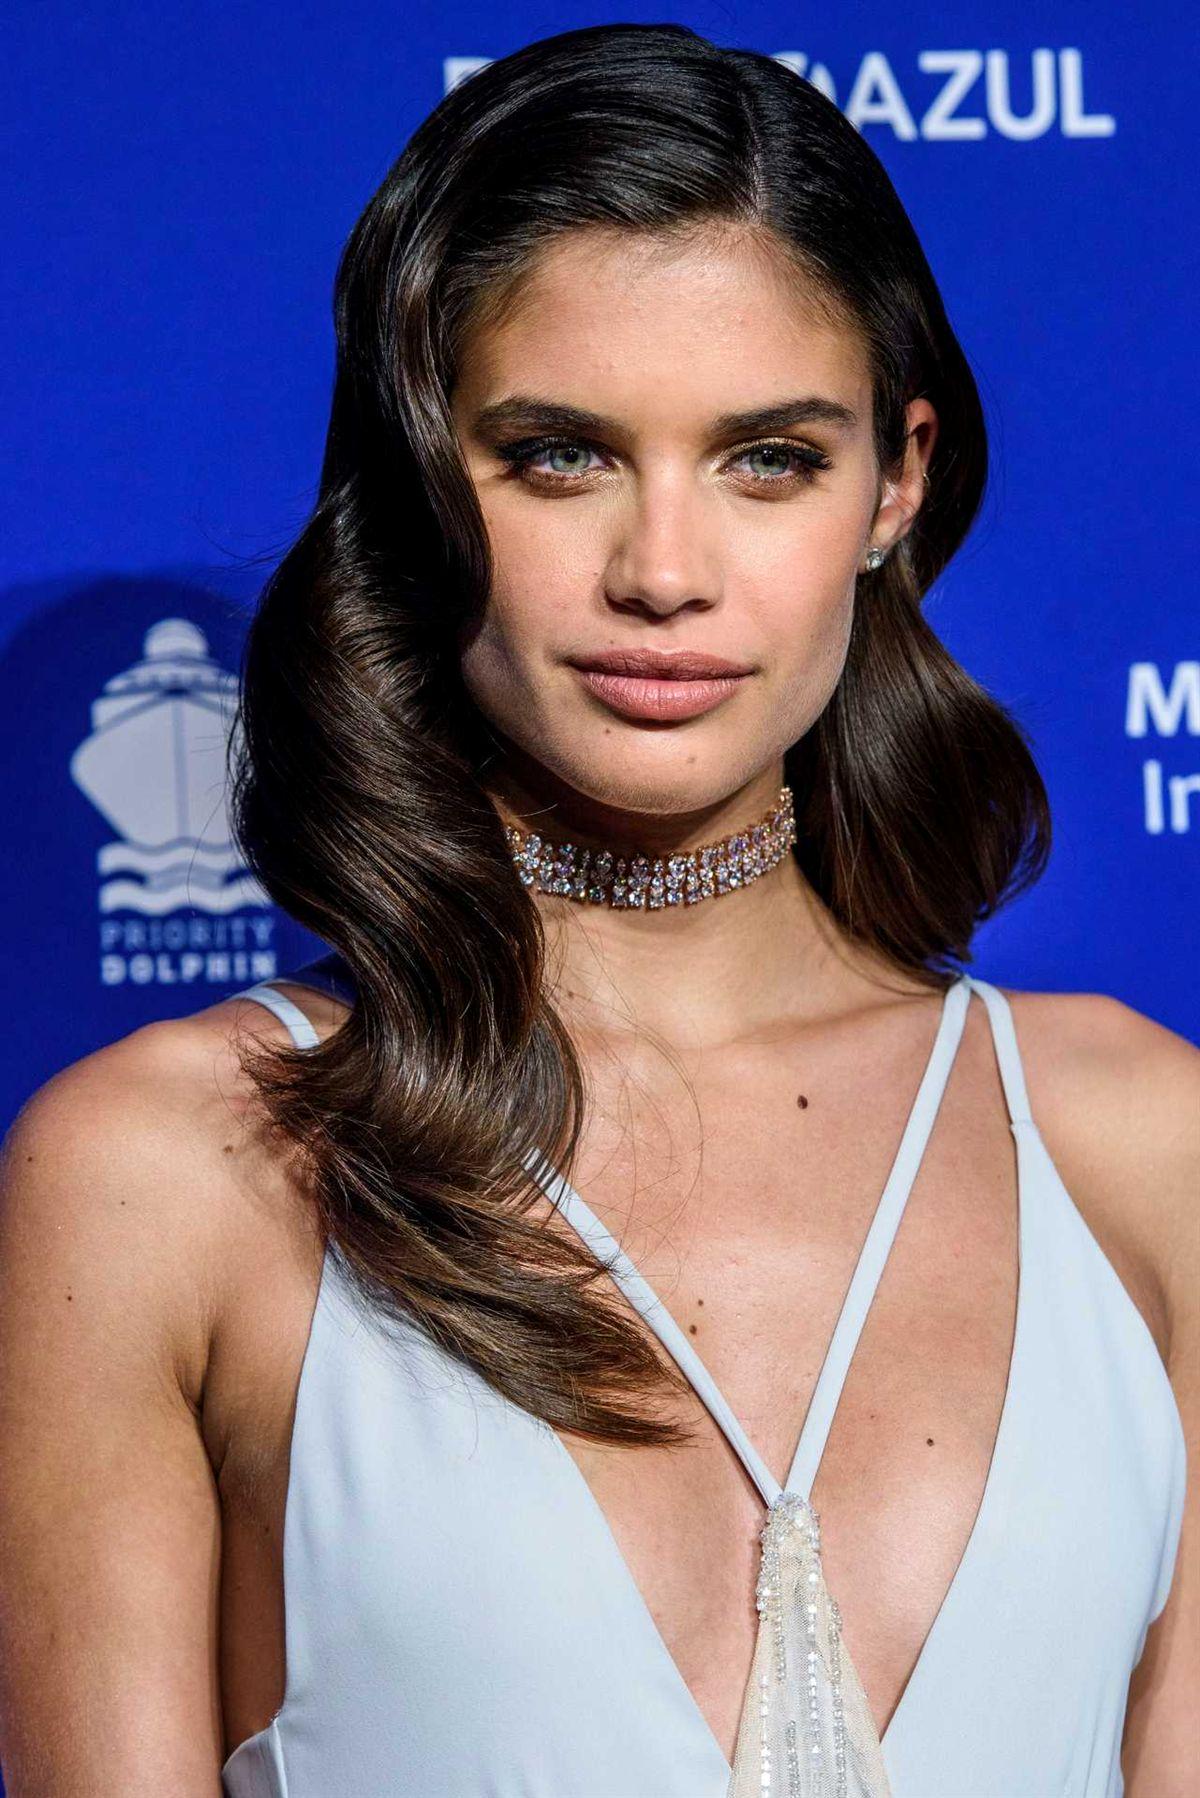 Backless Dress is The Best Fit For Sara Sampaio